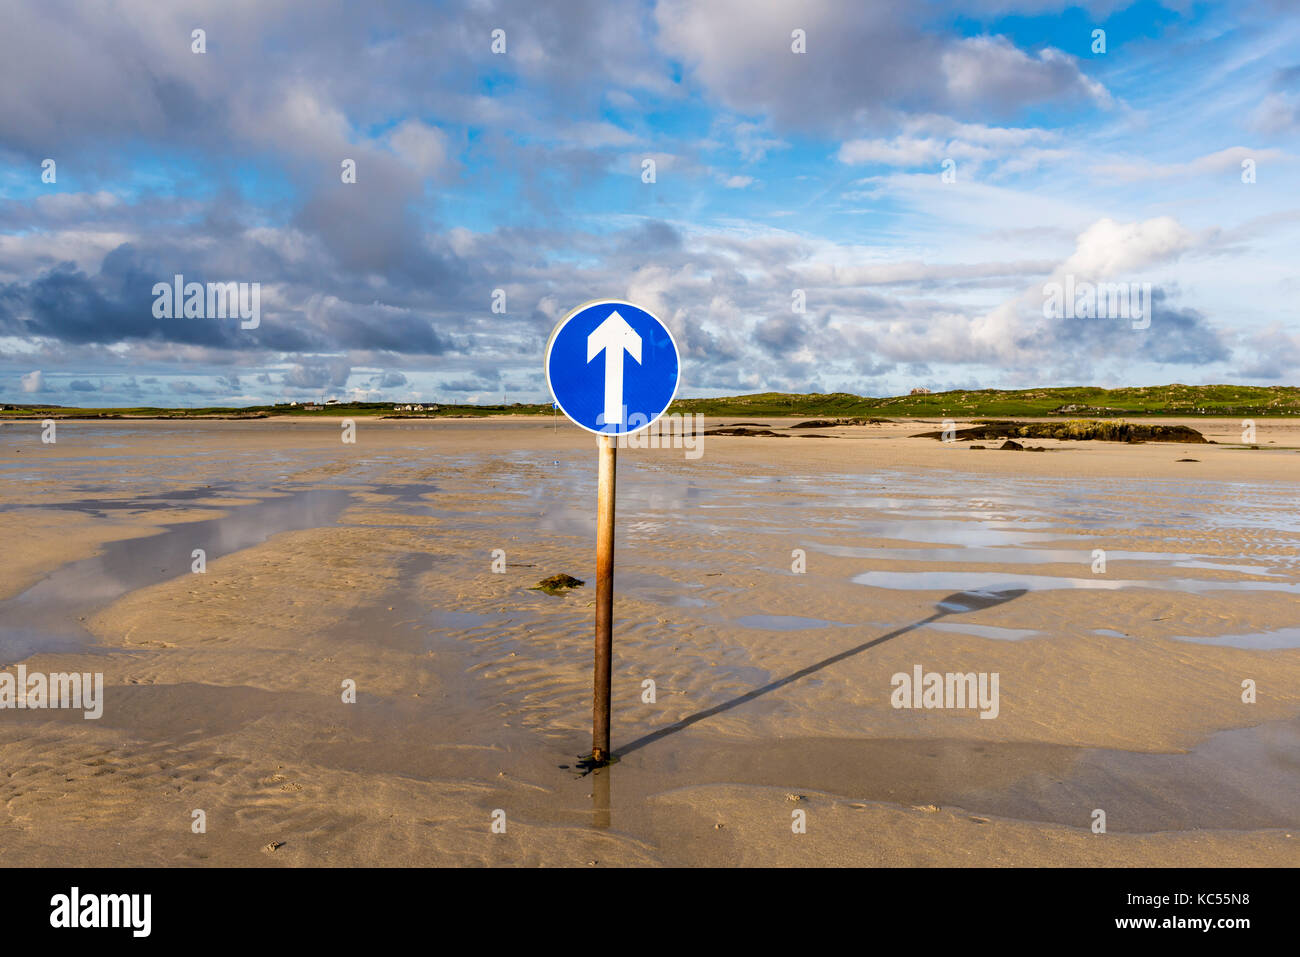 Route marking to the tidal island of Omey Island, only navigable at low tide, Omey Island, County Galway, Ireland Stock Photo